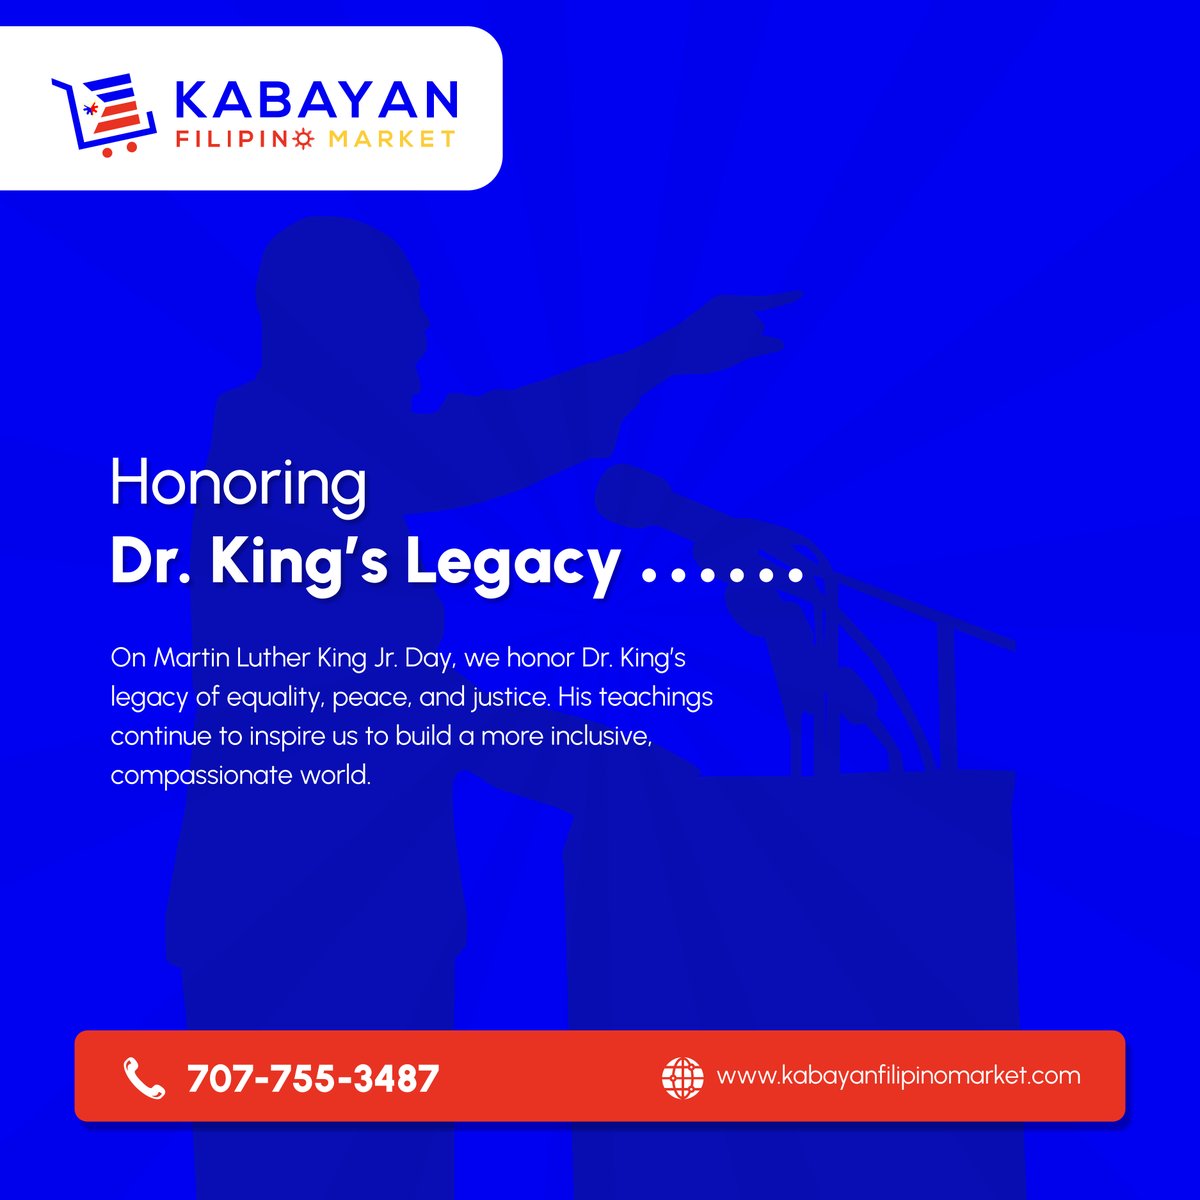 Celebrate Martin Luther King Jr. Day at Kabayan Filipino Market. Reflect on Dr. King's inspiring legacy as we strive toward a world of equality, peace, and justice. 

#EqualityAndPeace #MLKDay #JusticeForAll #HonoringMLK